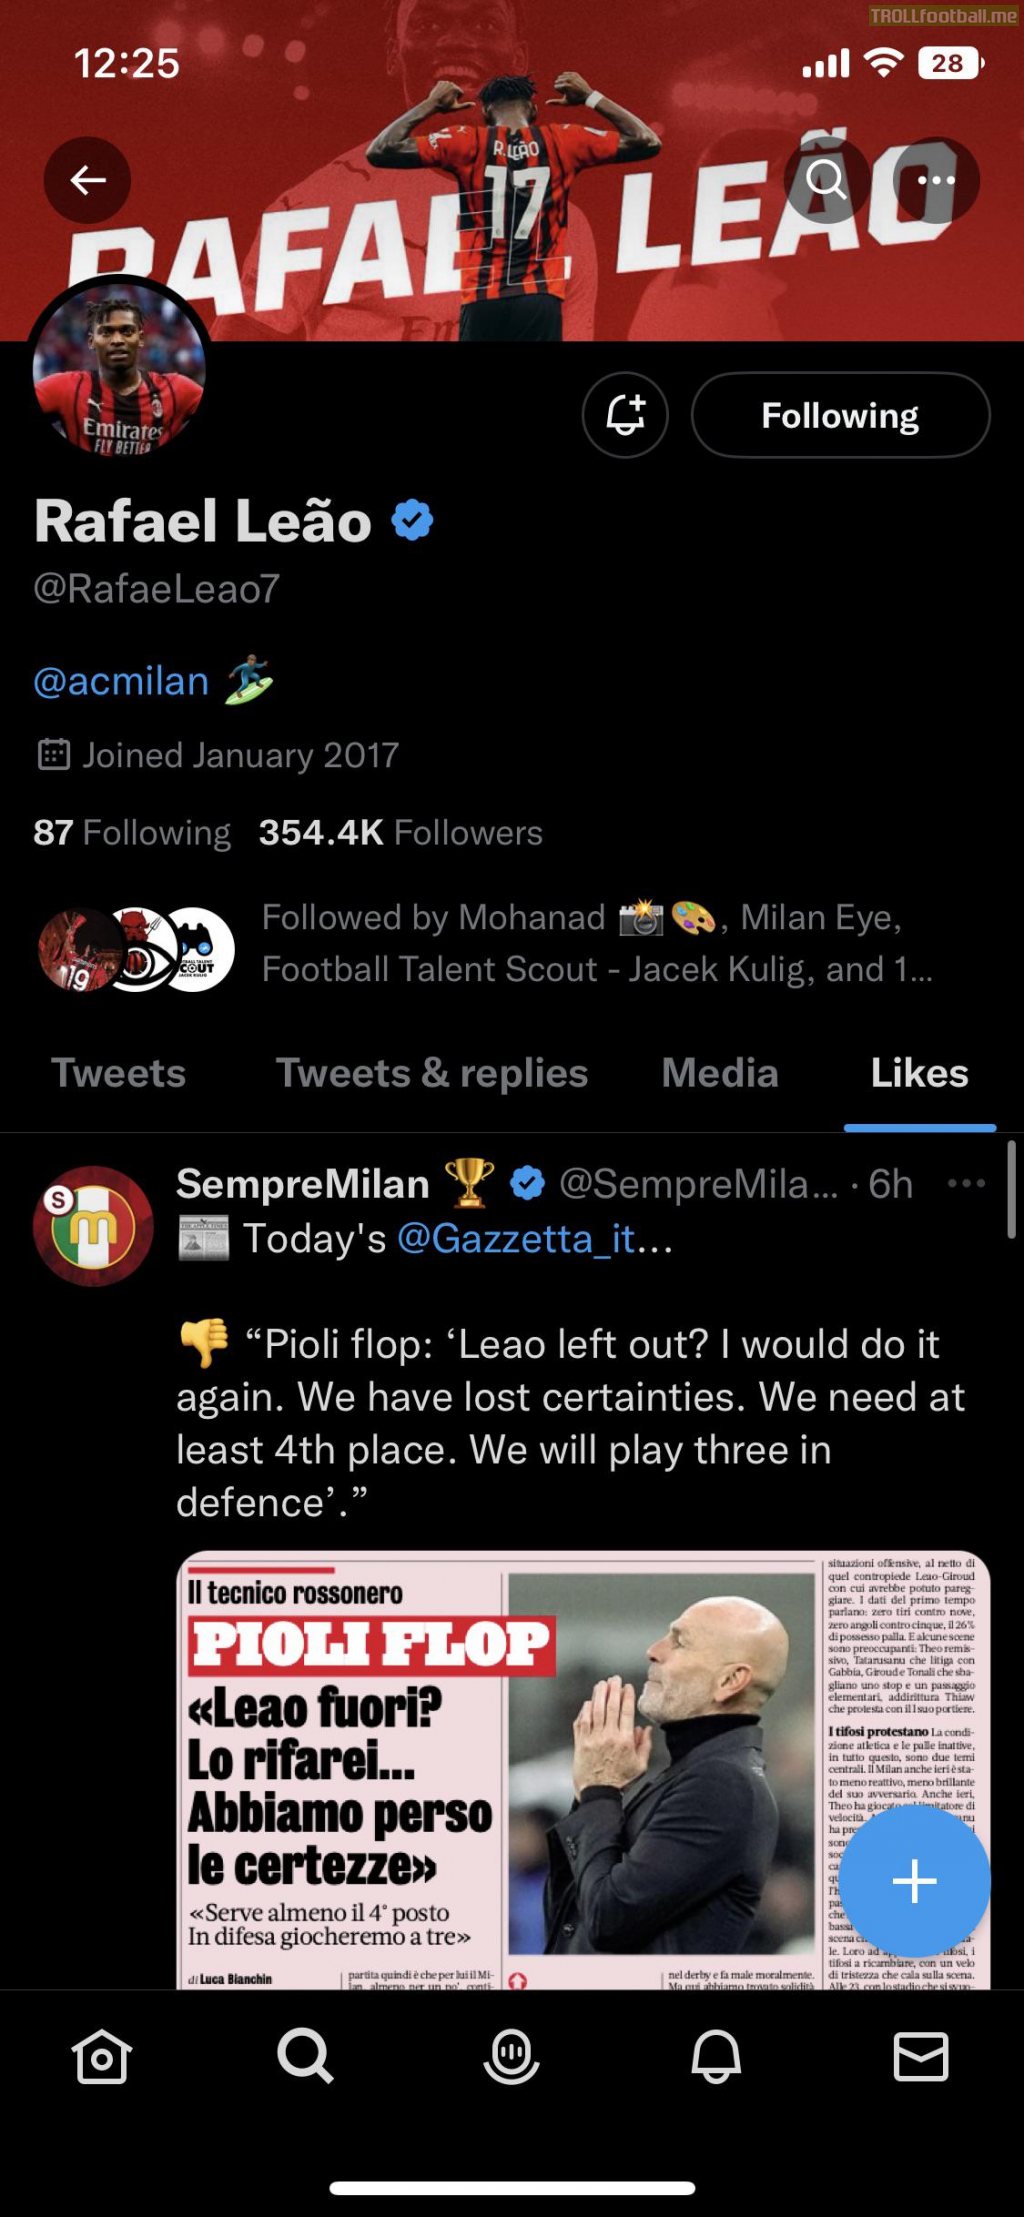 Leao has liked an ironic tweet criticizing Milan coach Piolis decision to leave him on the bench in the derby against Inter